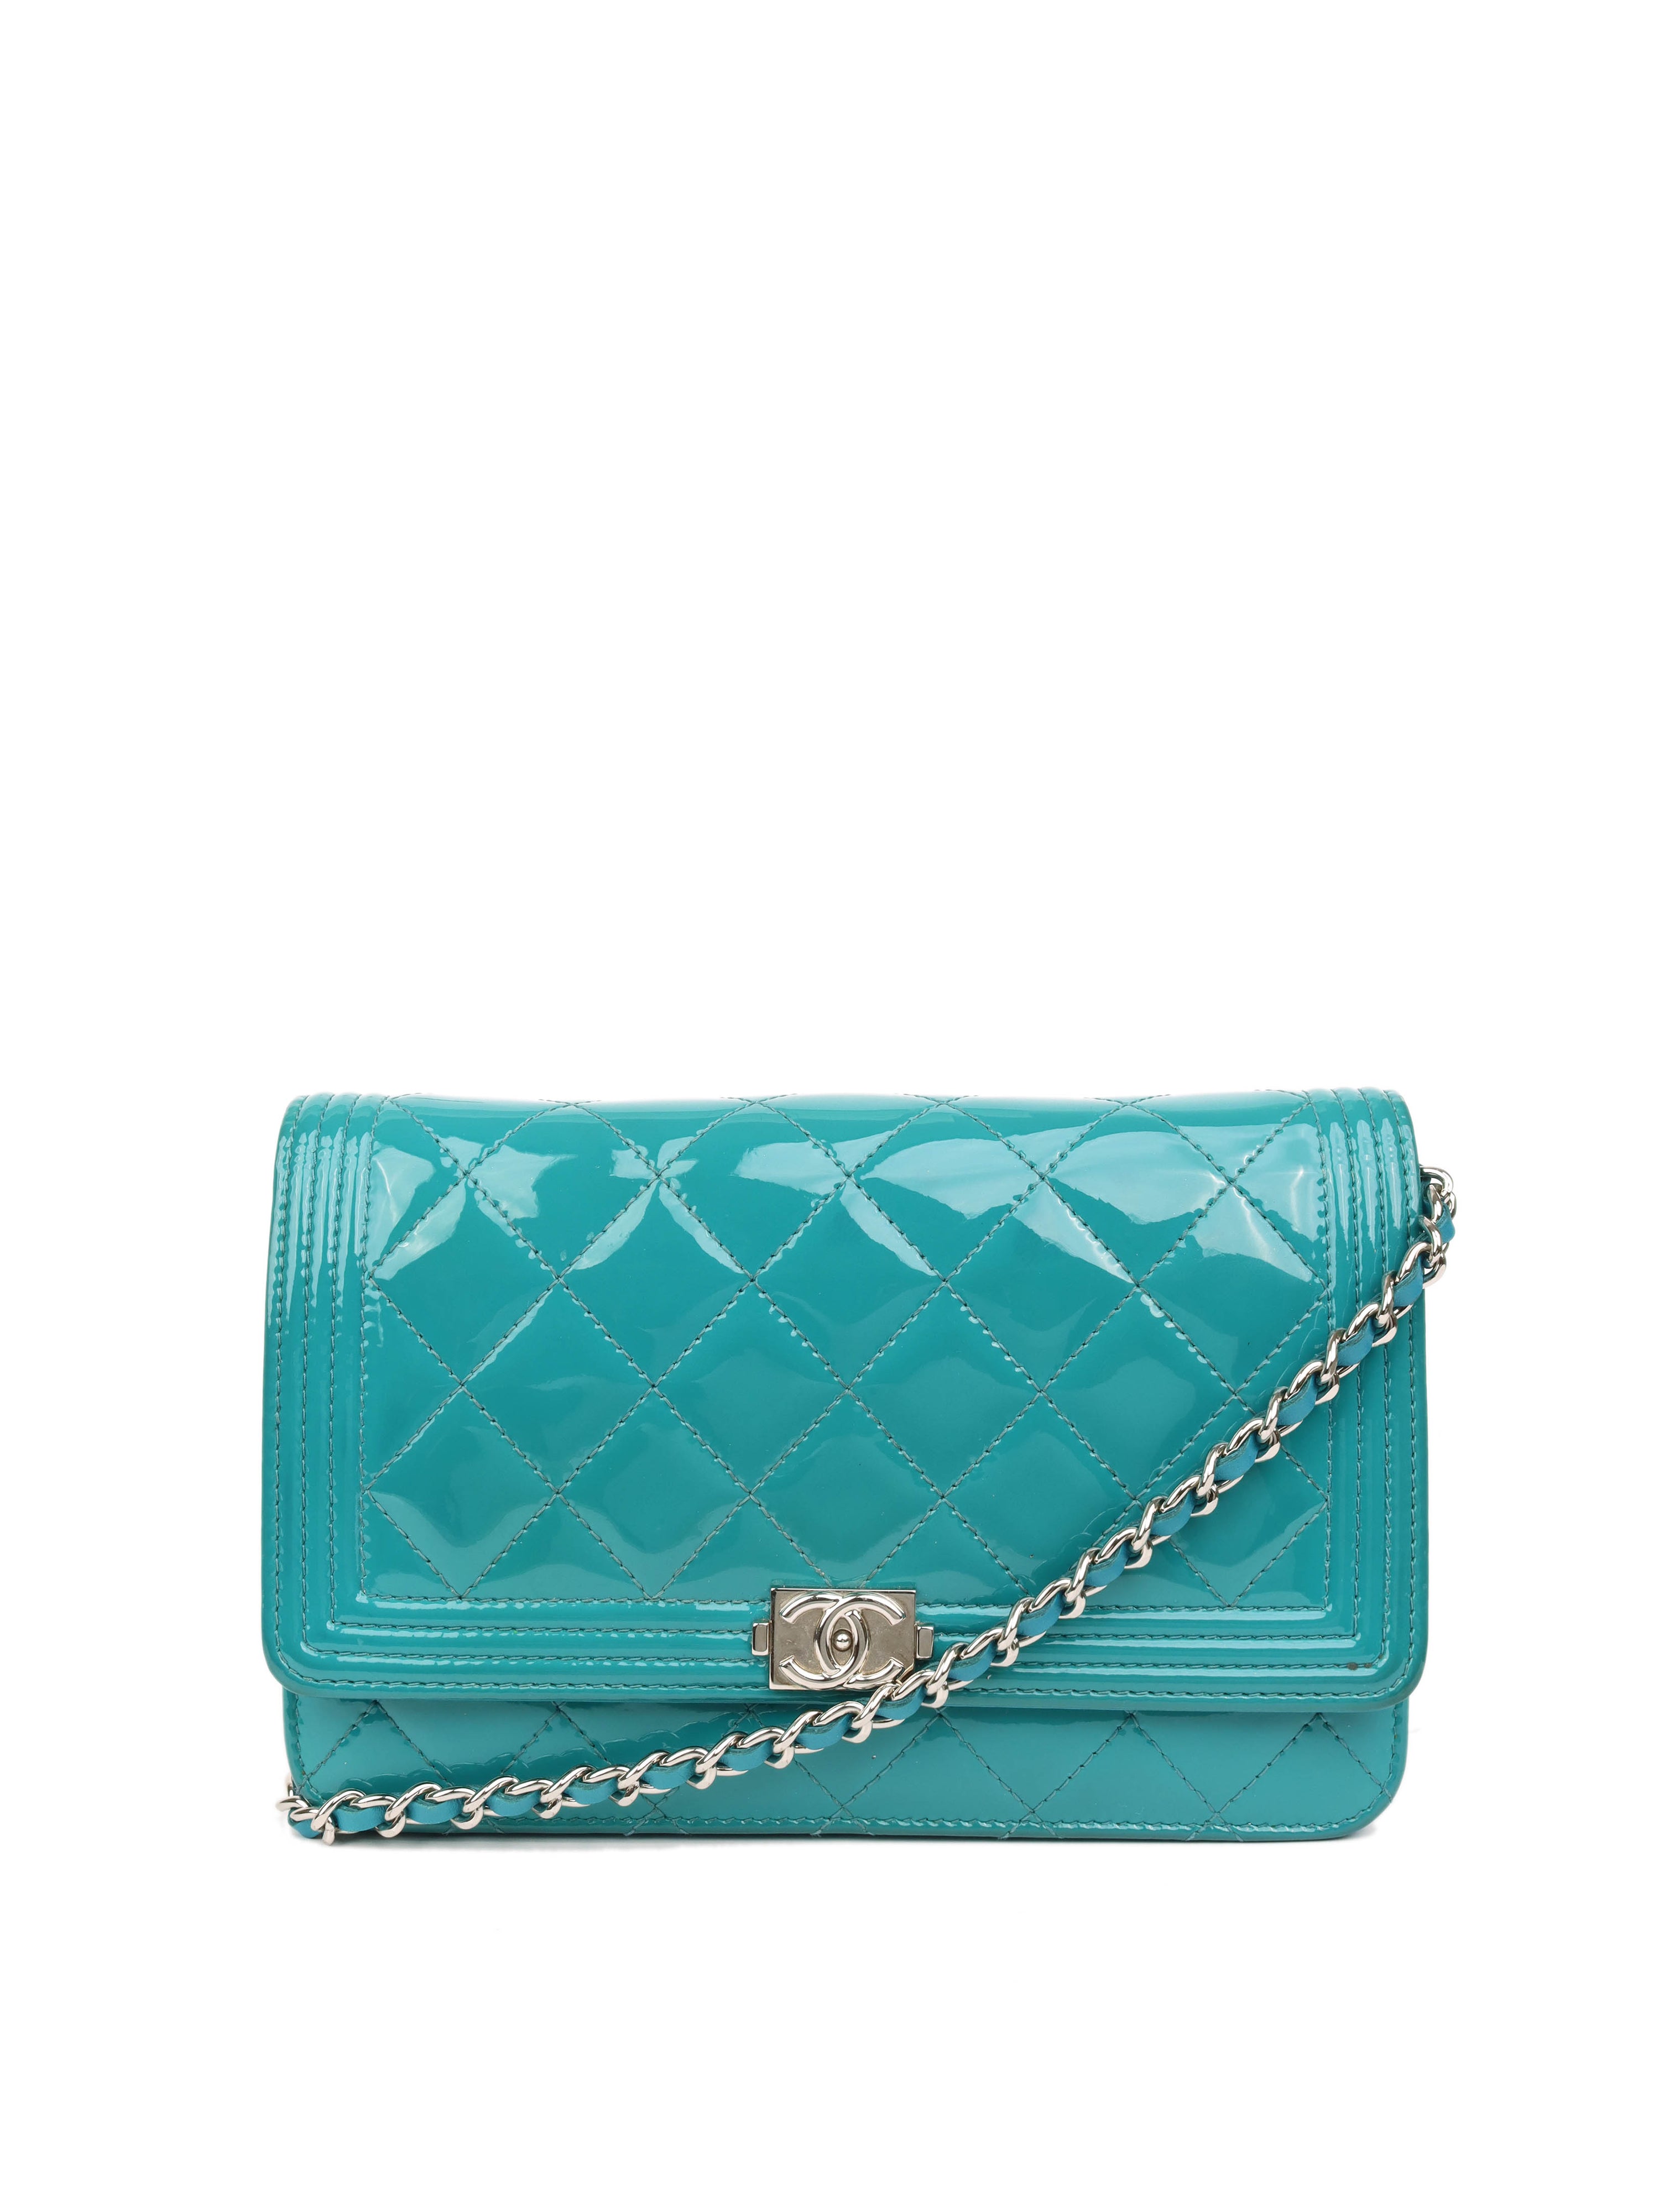 Chanel Teal Blue Patent Wallet on Chain SHW